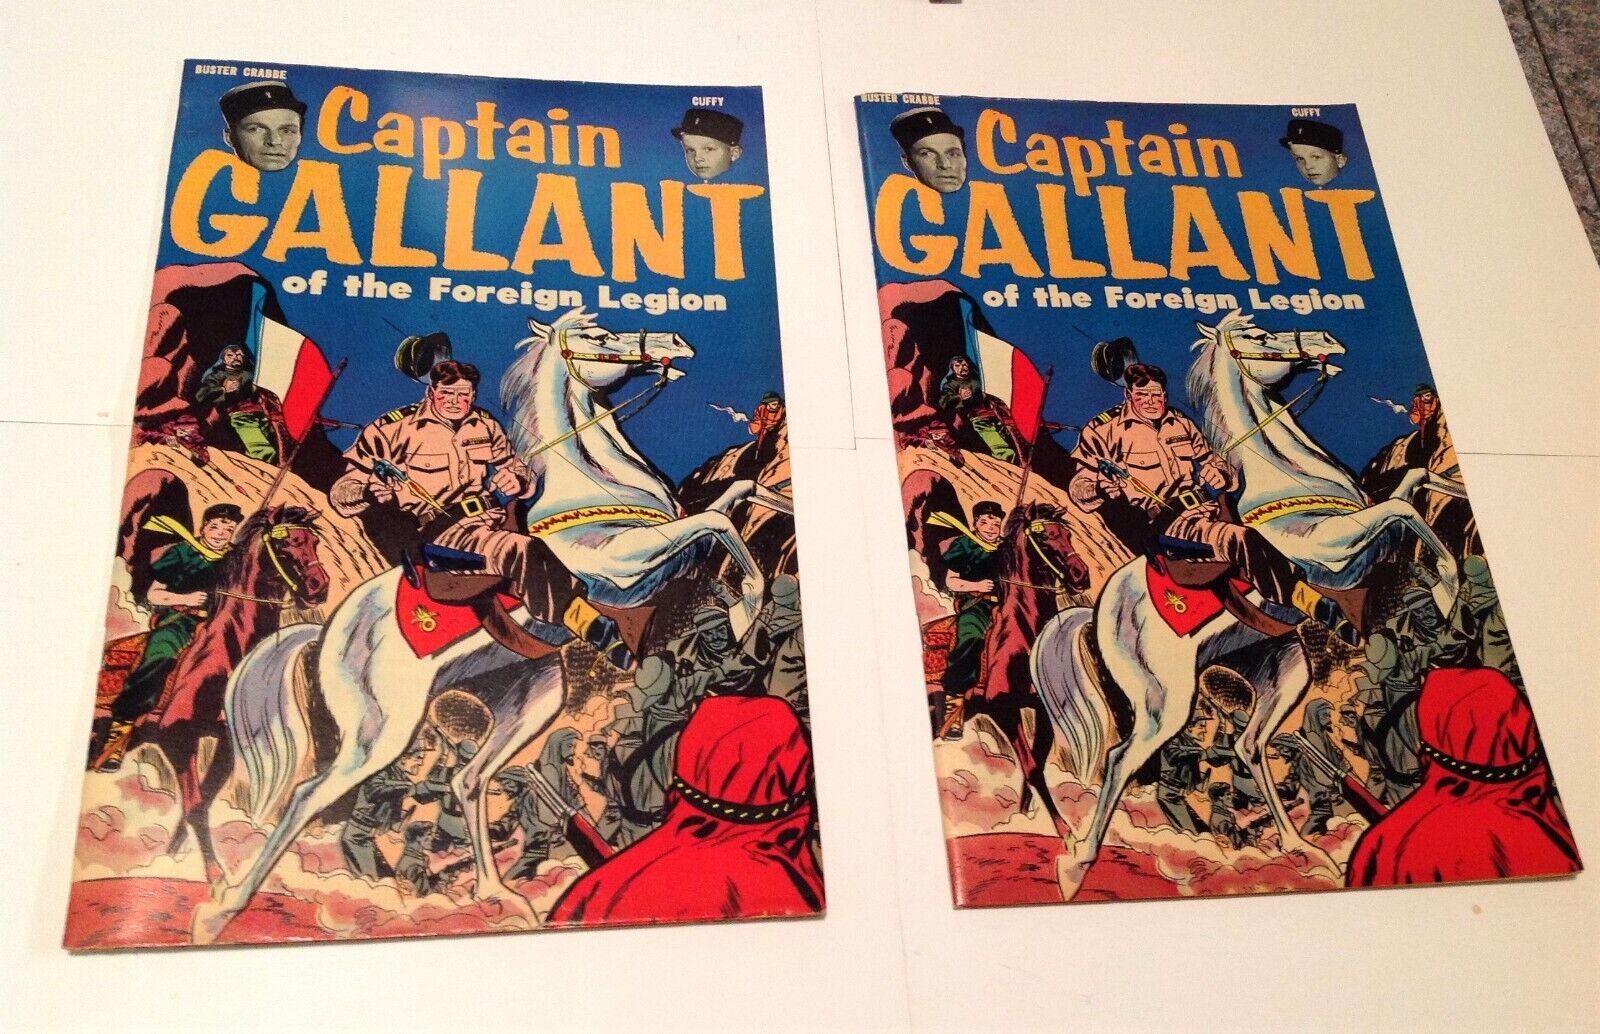 Captain Gallant of the Foreign Legion #1 1955 Heinz Food Promo 2 Book Lot (B)